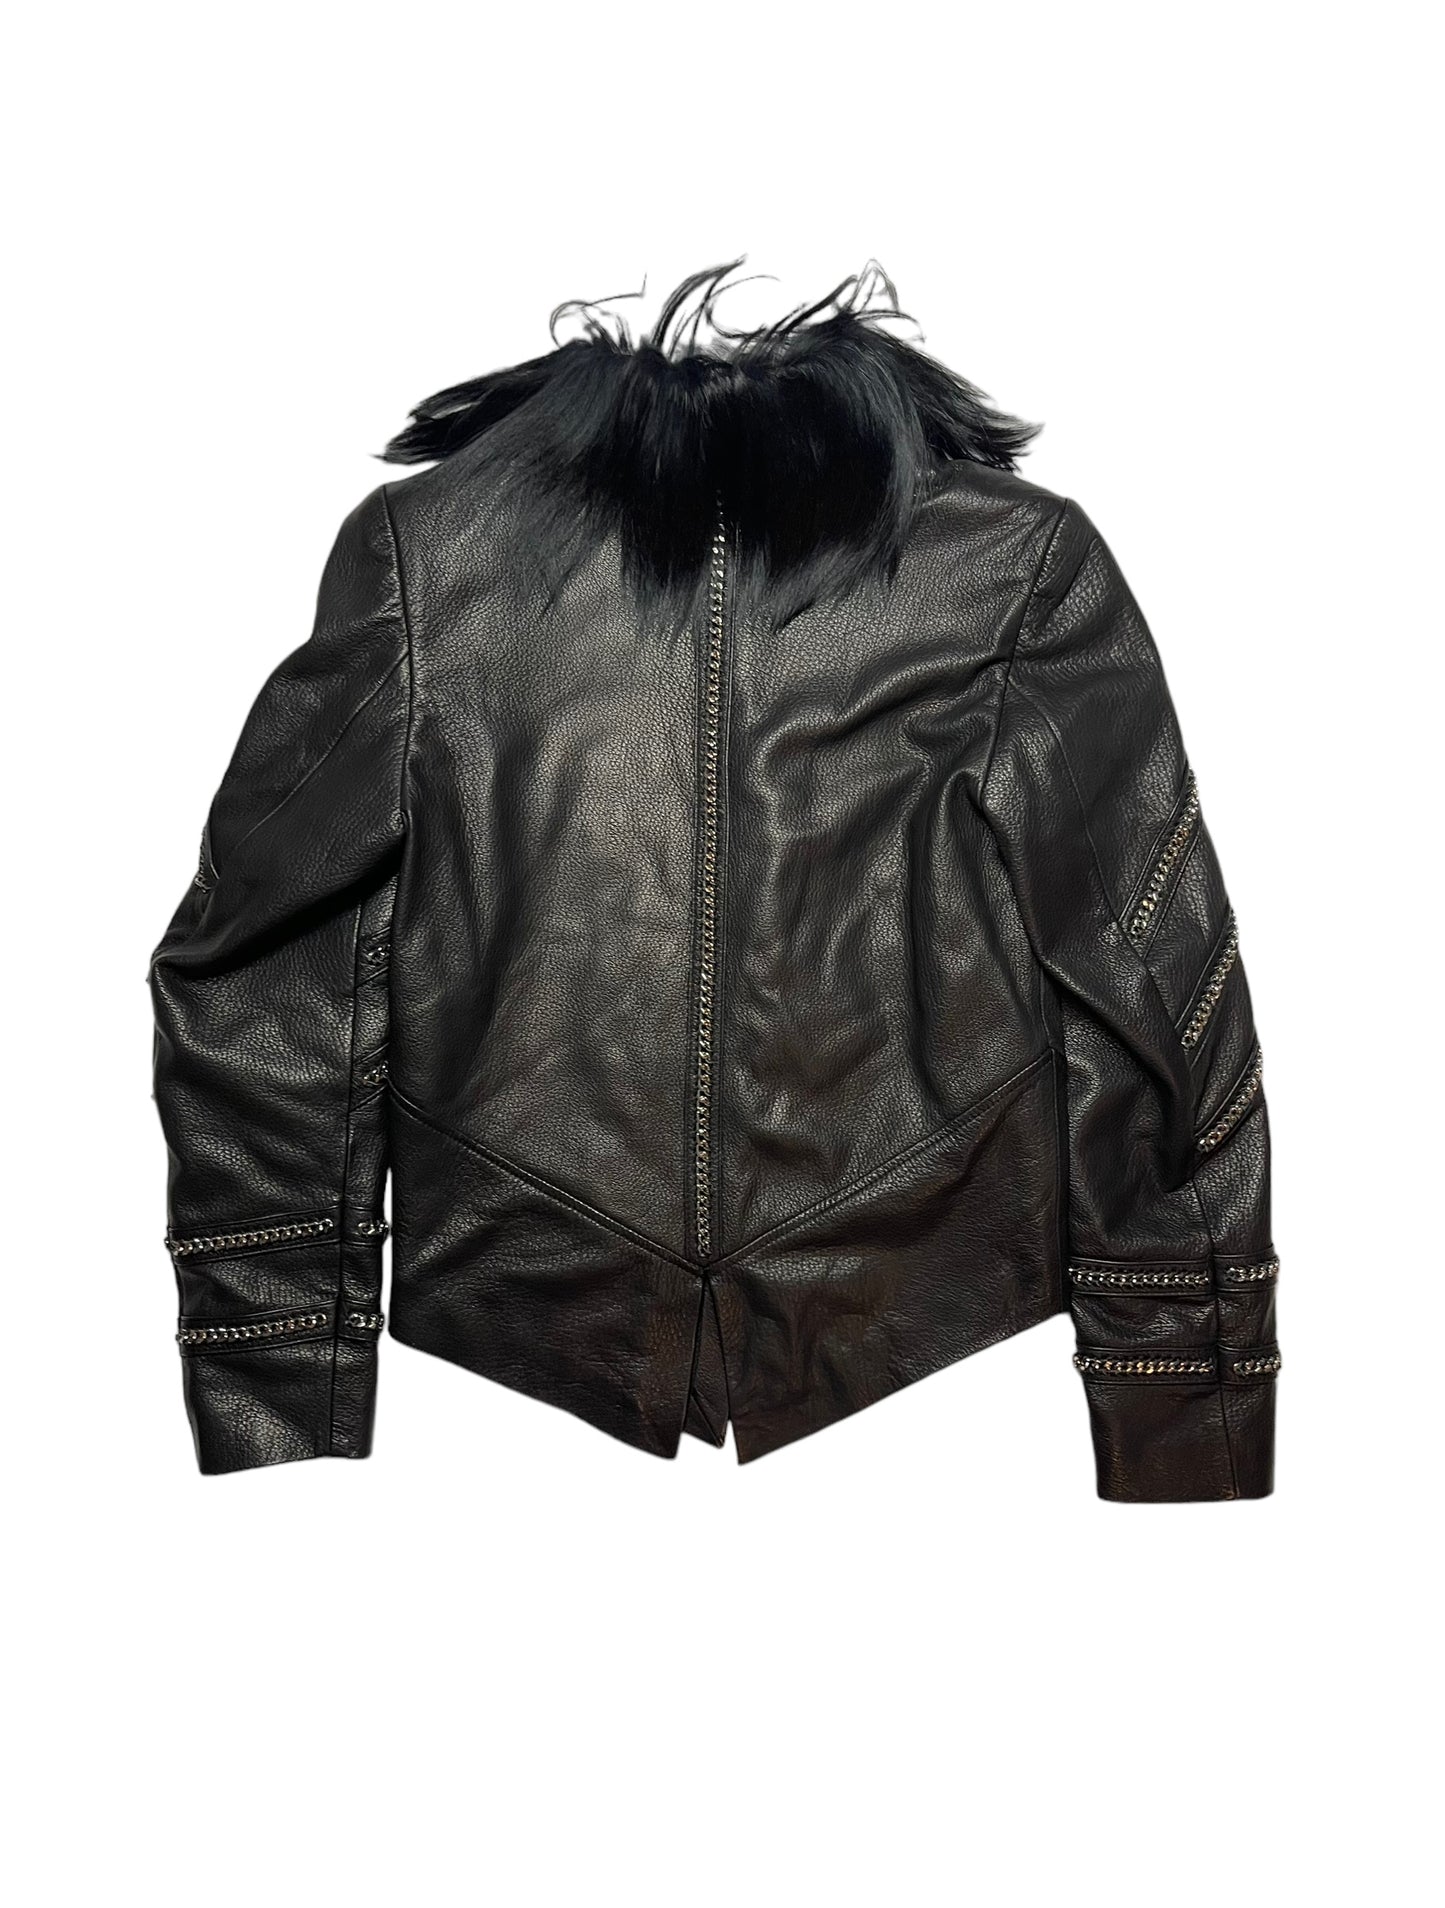 [Black] Hussar Chain Braided Leather Jacket